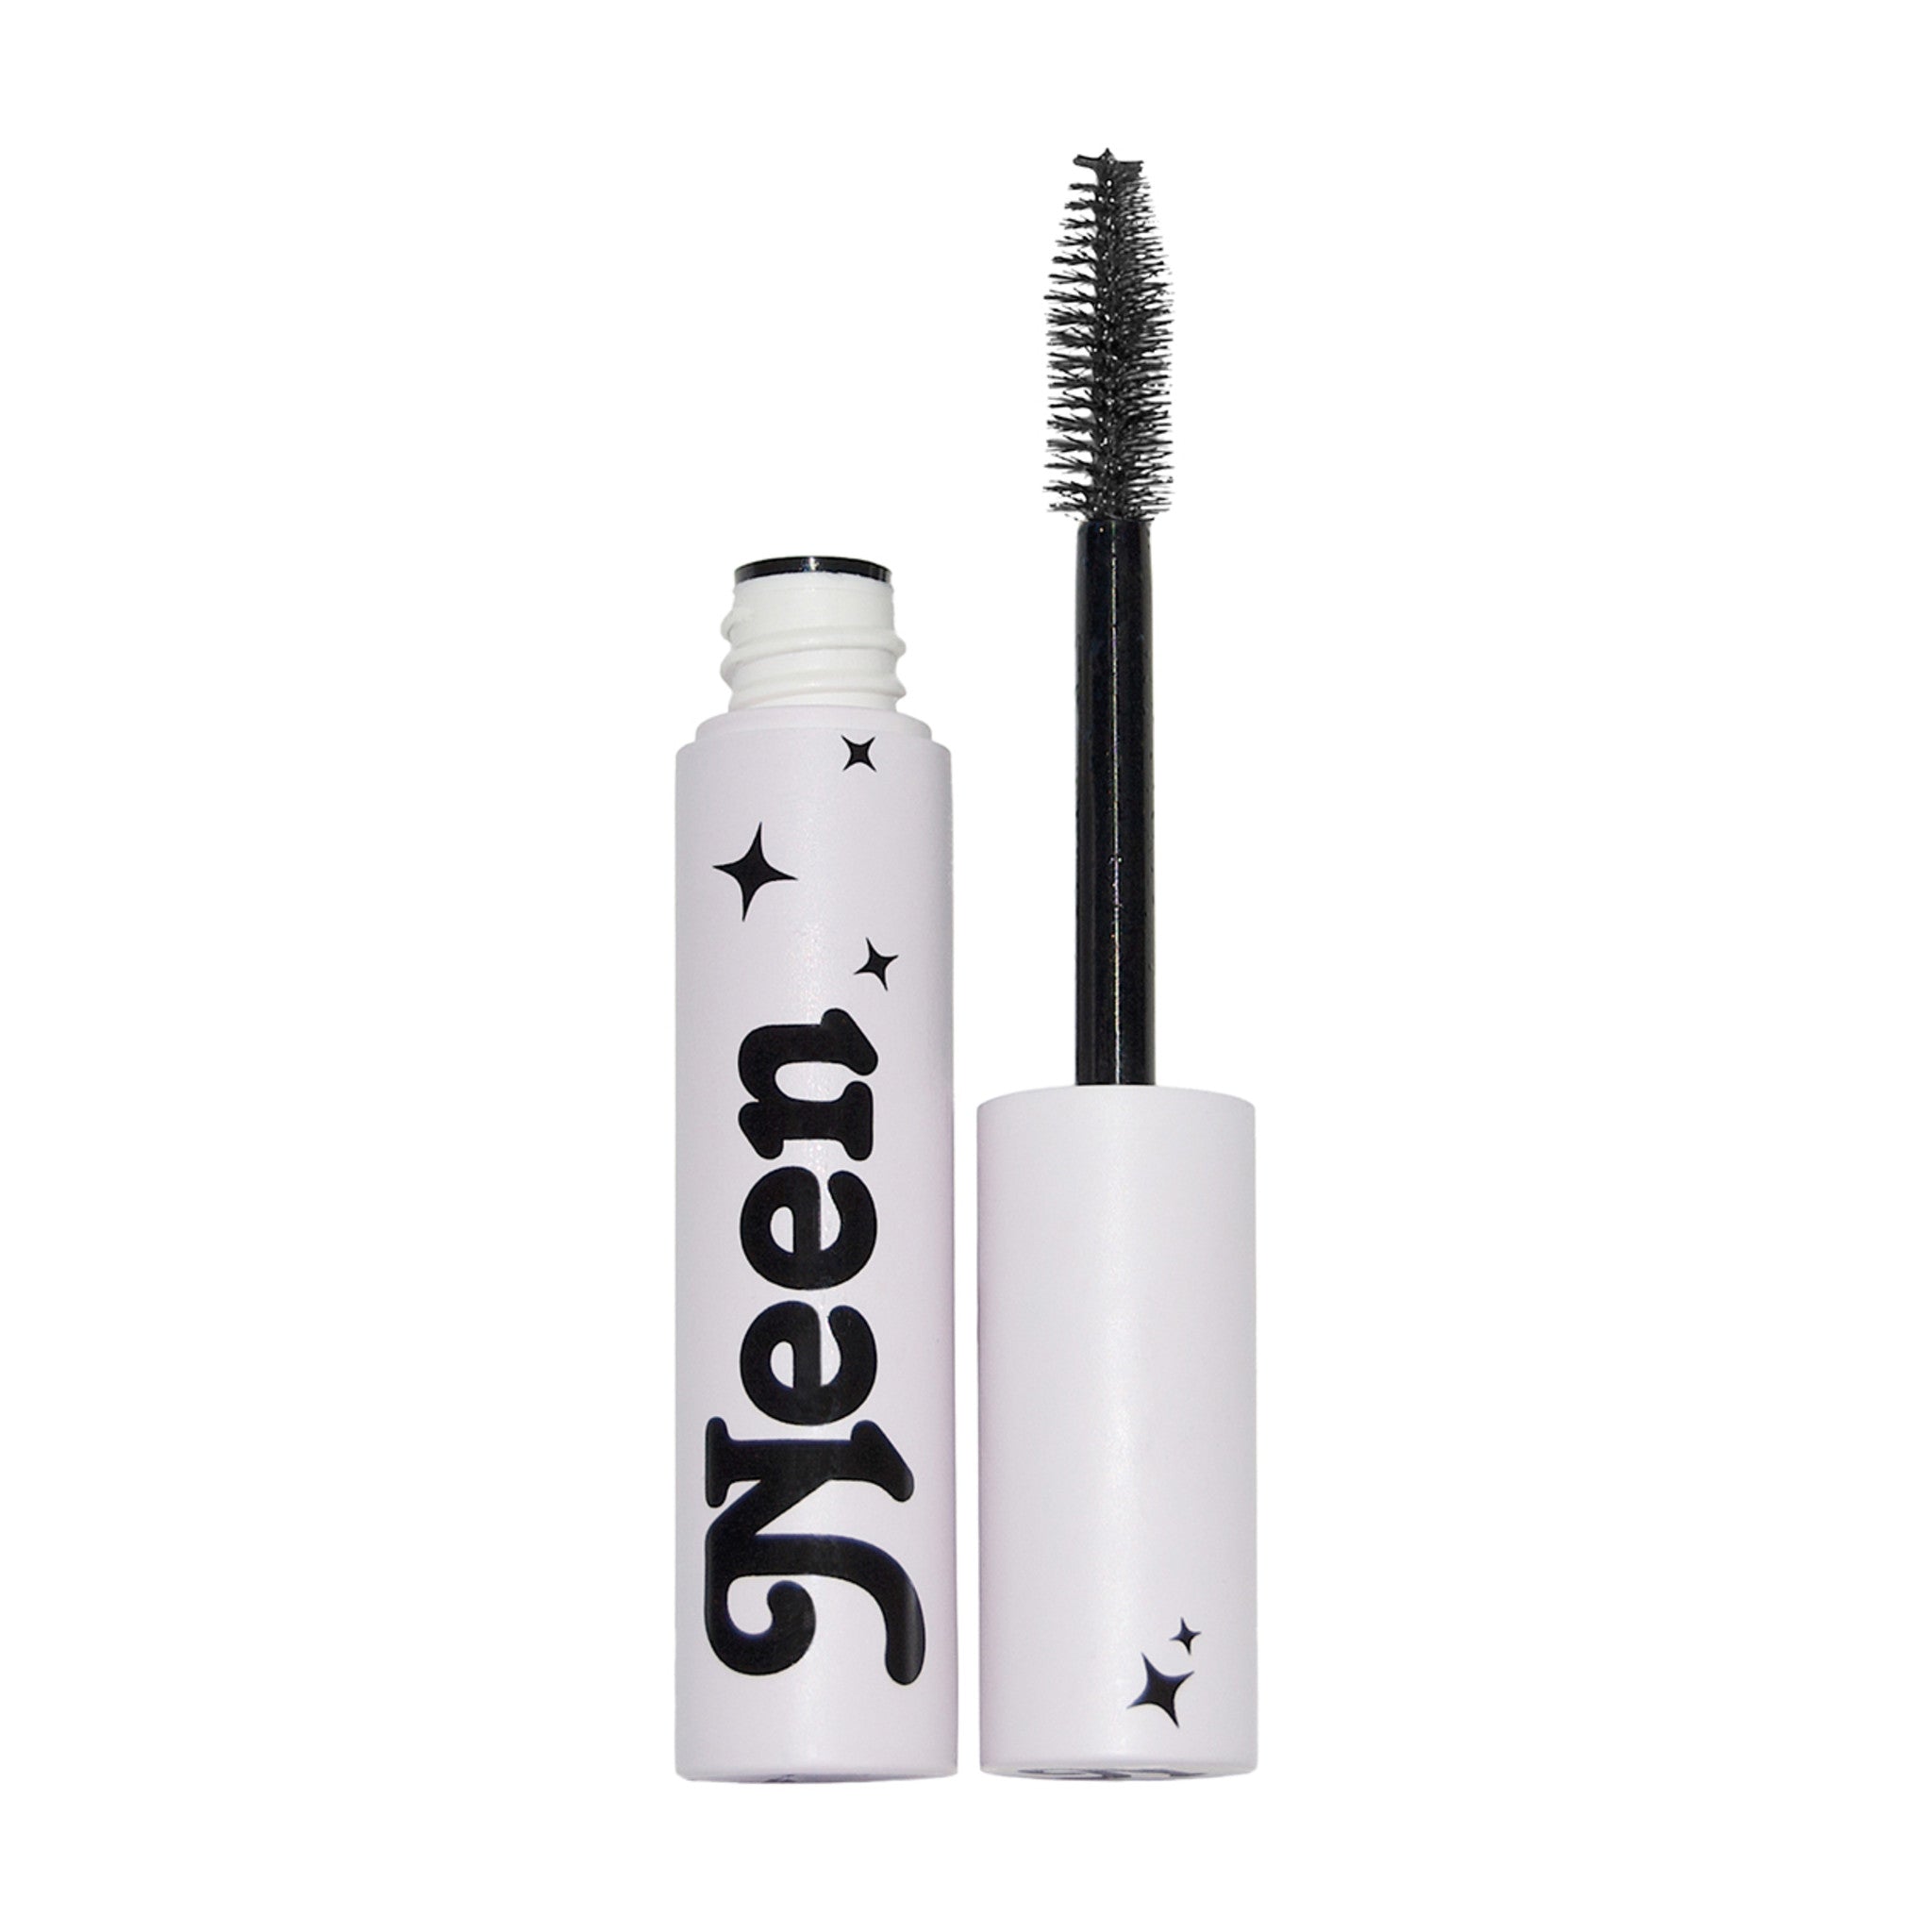 Neen Pretty Extra Mascara main image. This product is in the color black